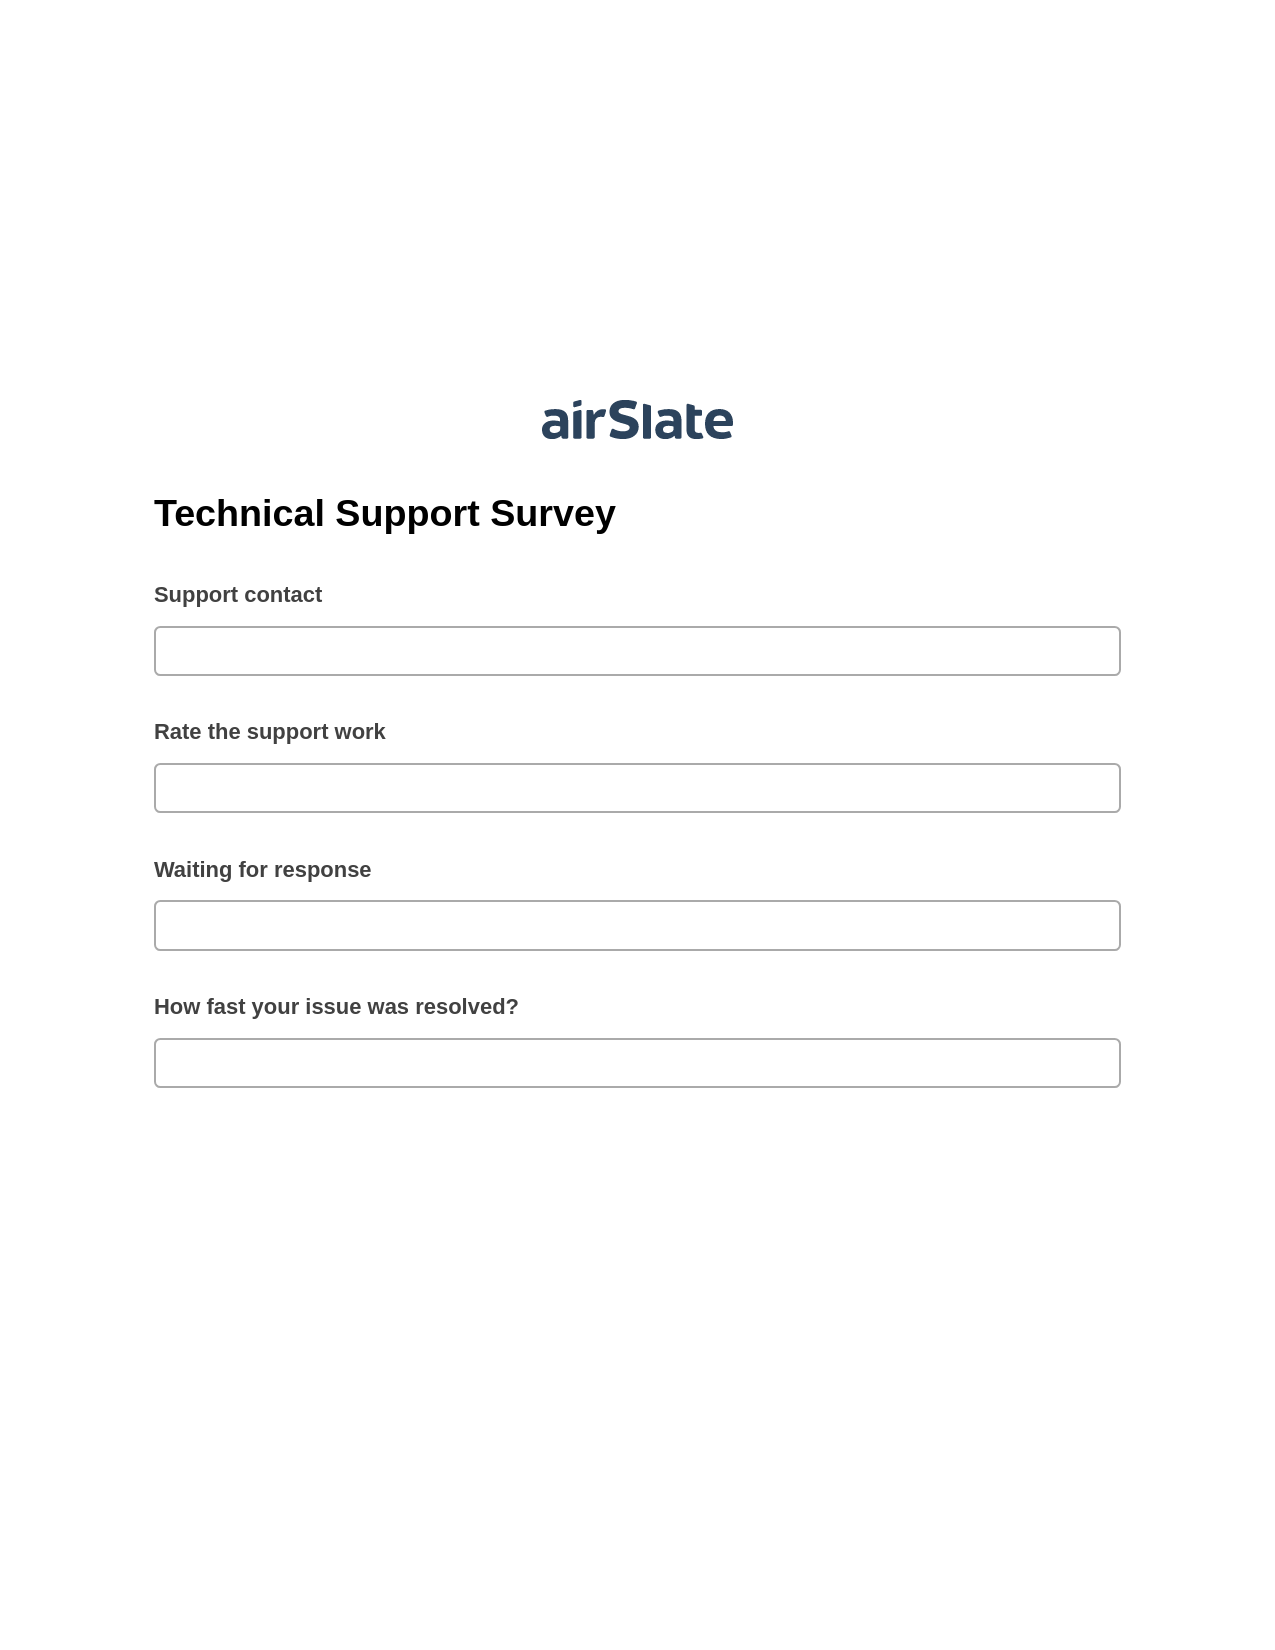 Technical Support Survey Pre-fill from MS Dynamics 365 Records, Set signature type addon, Slack Two-Way Binding Bot